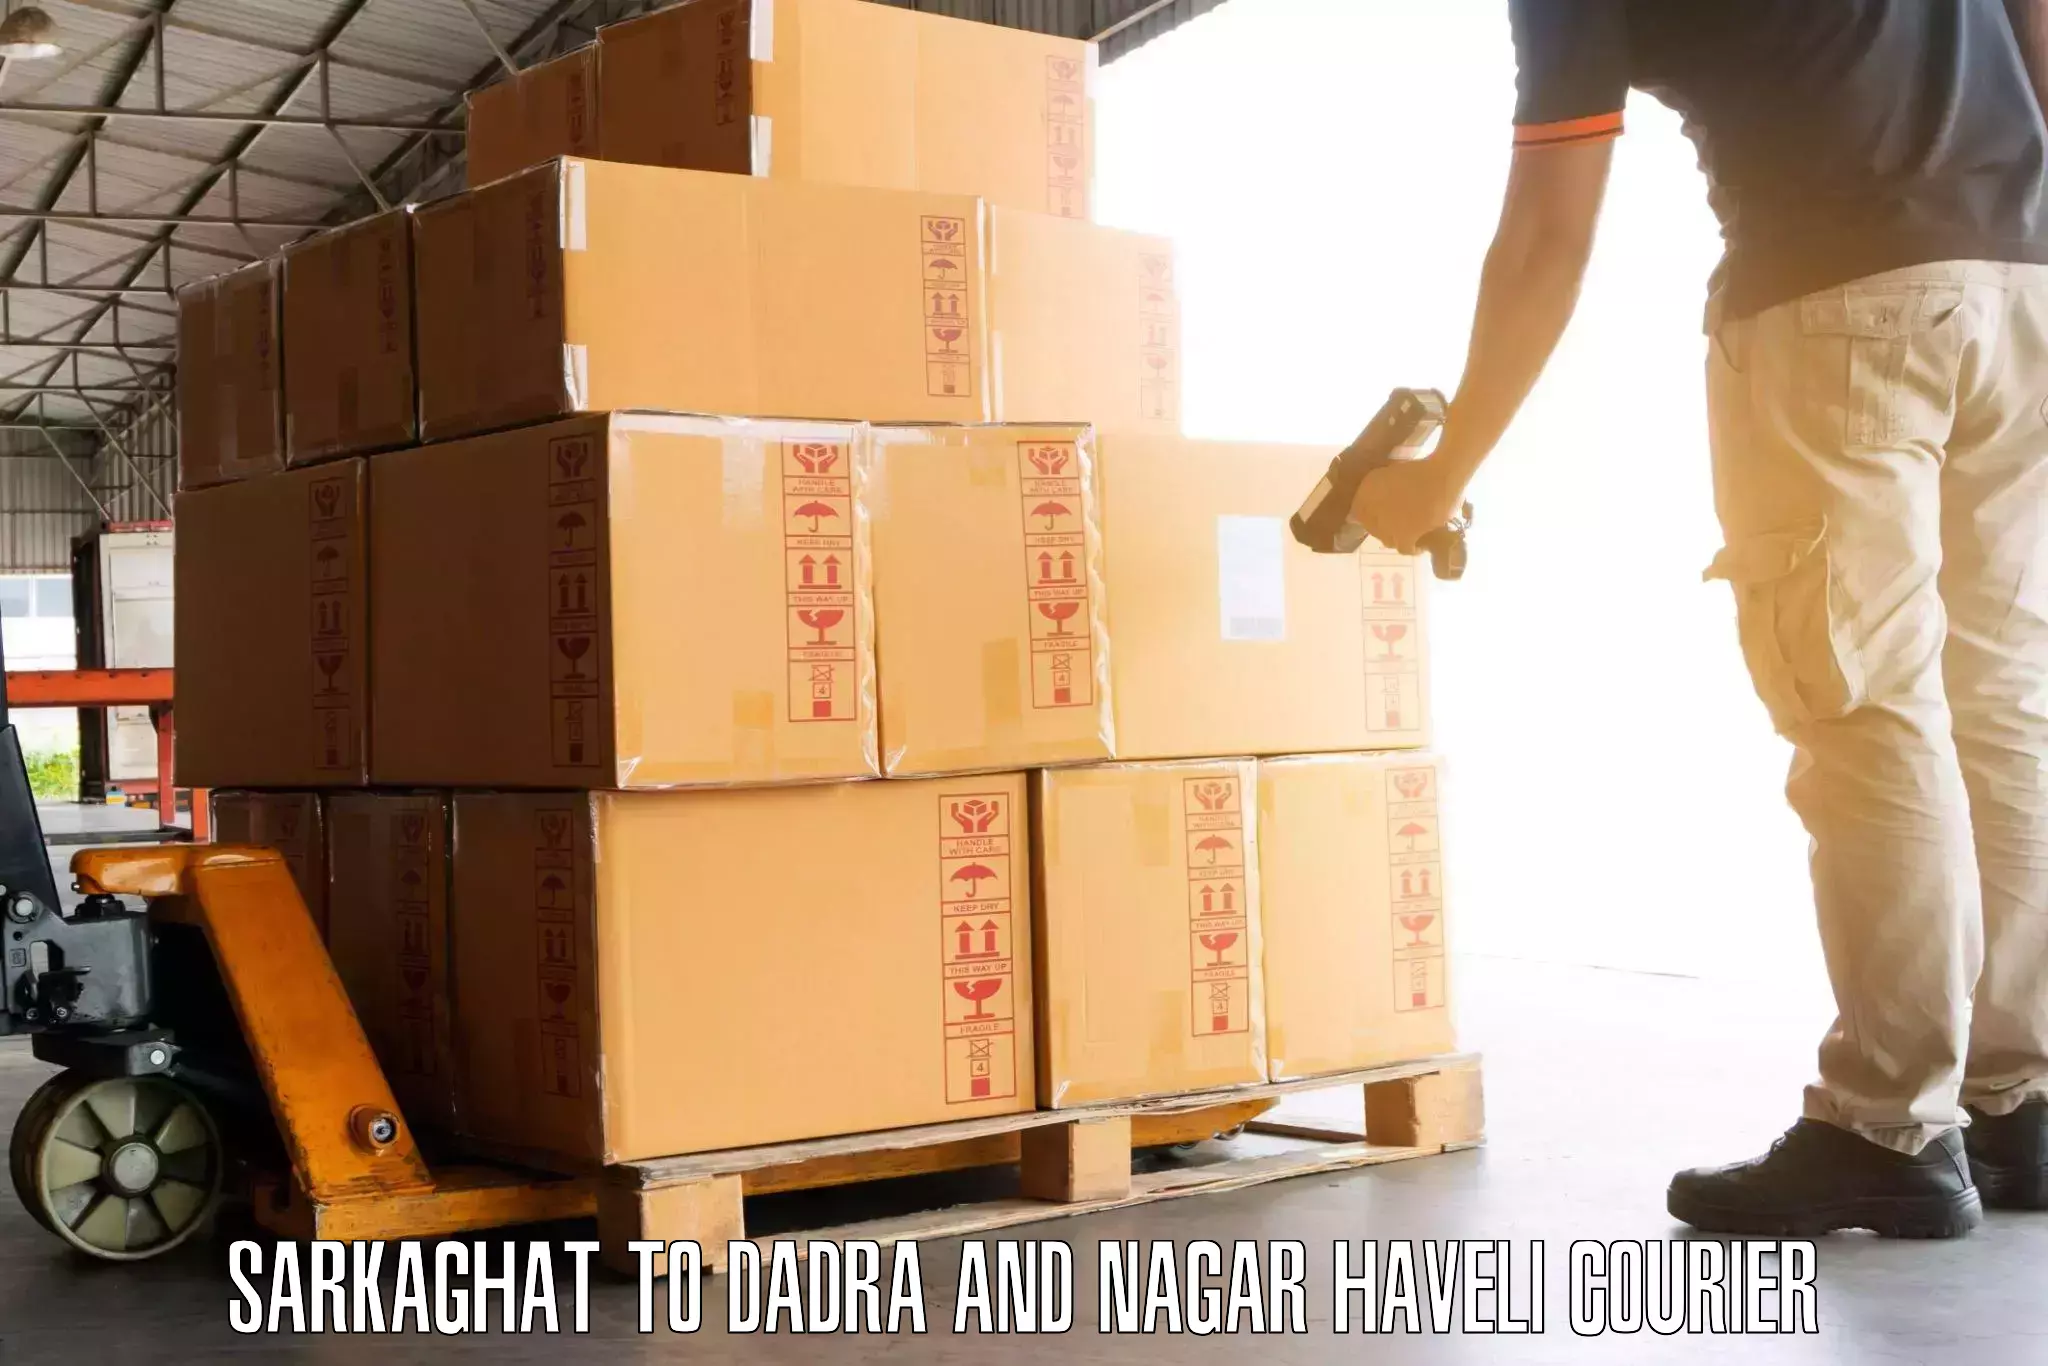 Luggage delivery system Sarkaghat to Dadra and Nagar Haveli